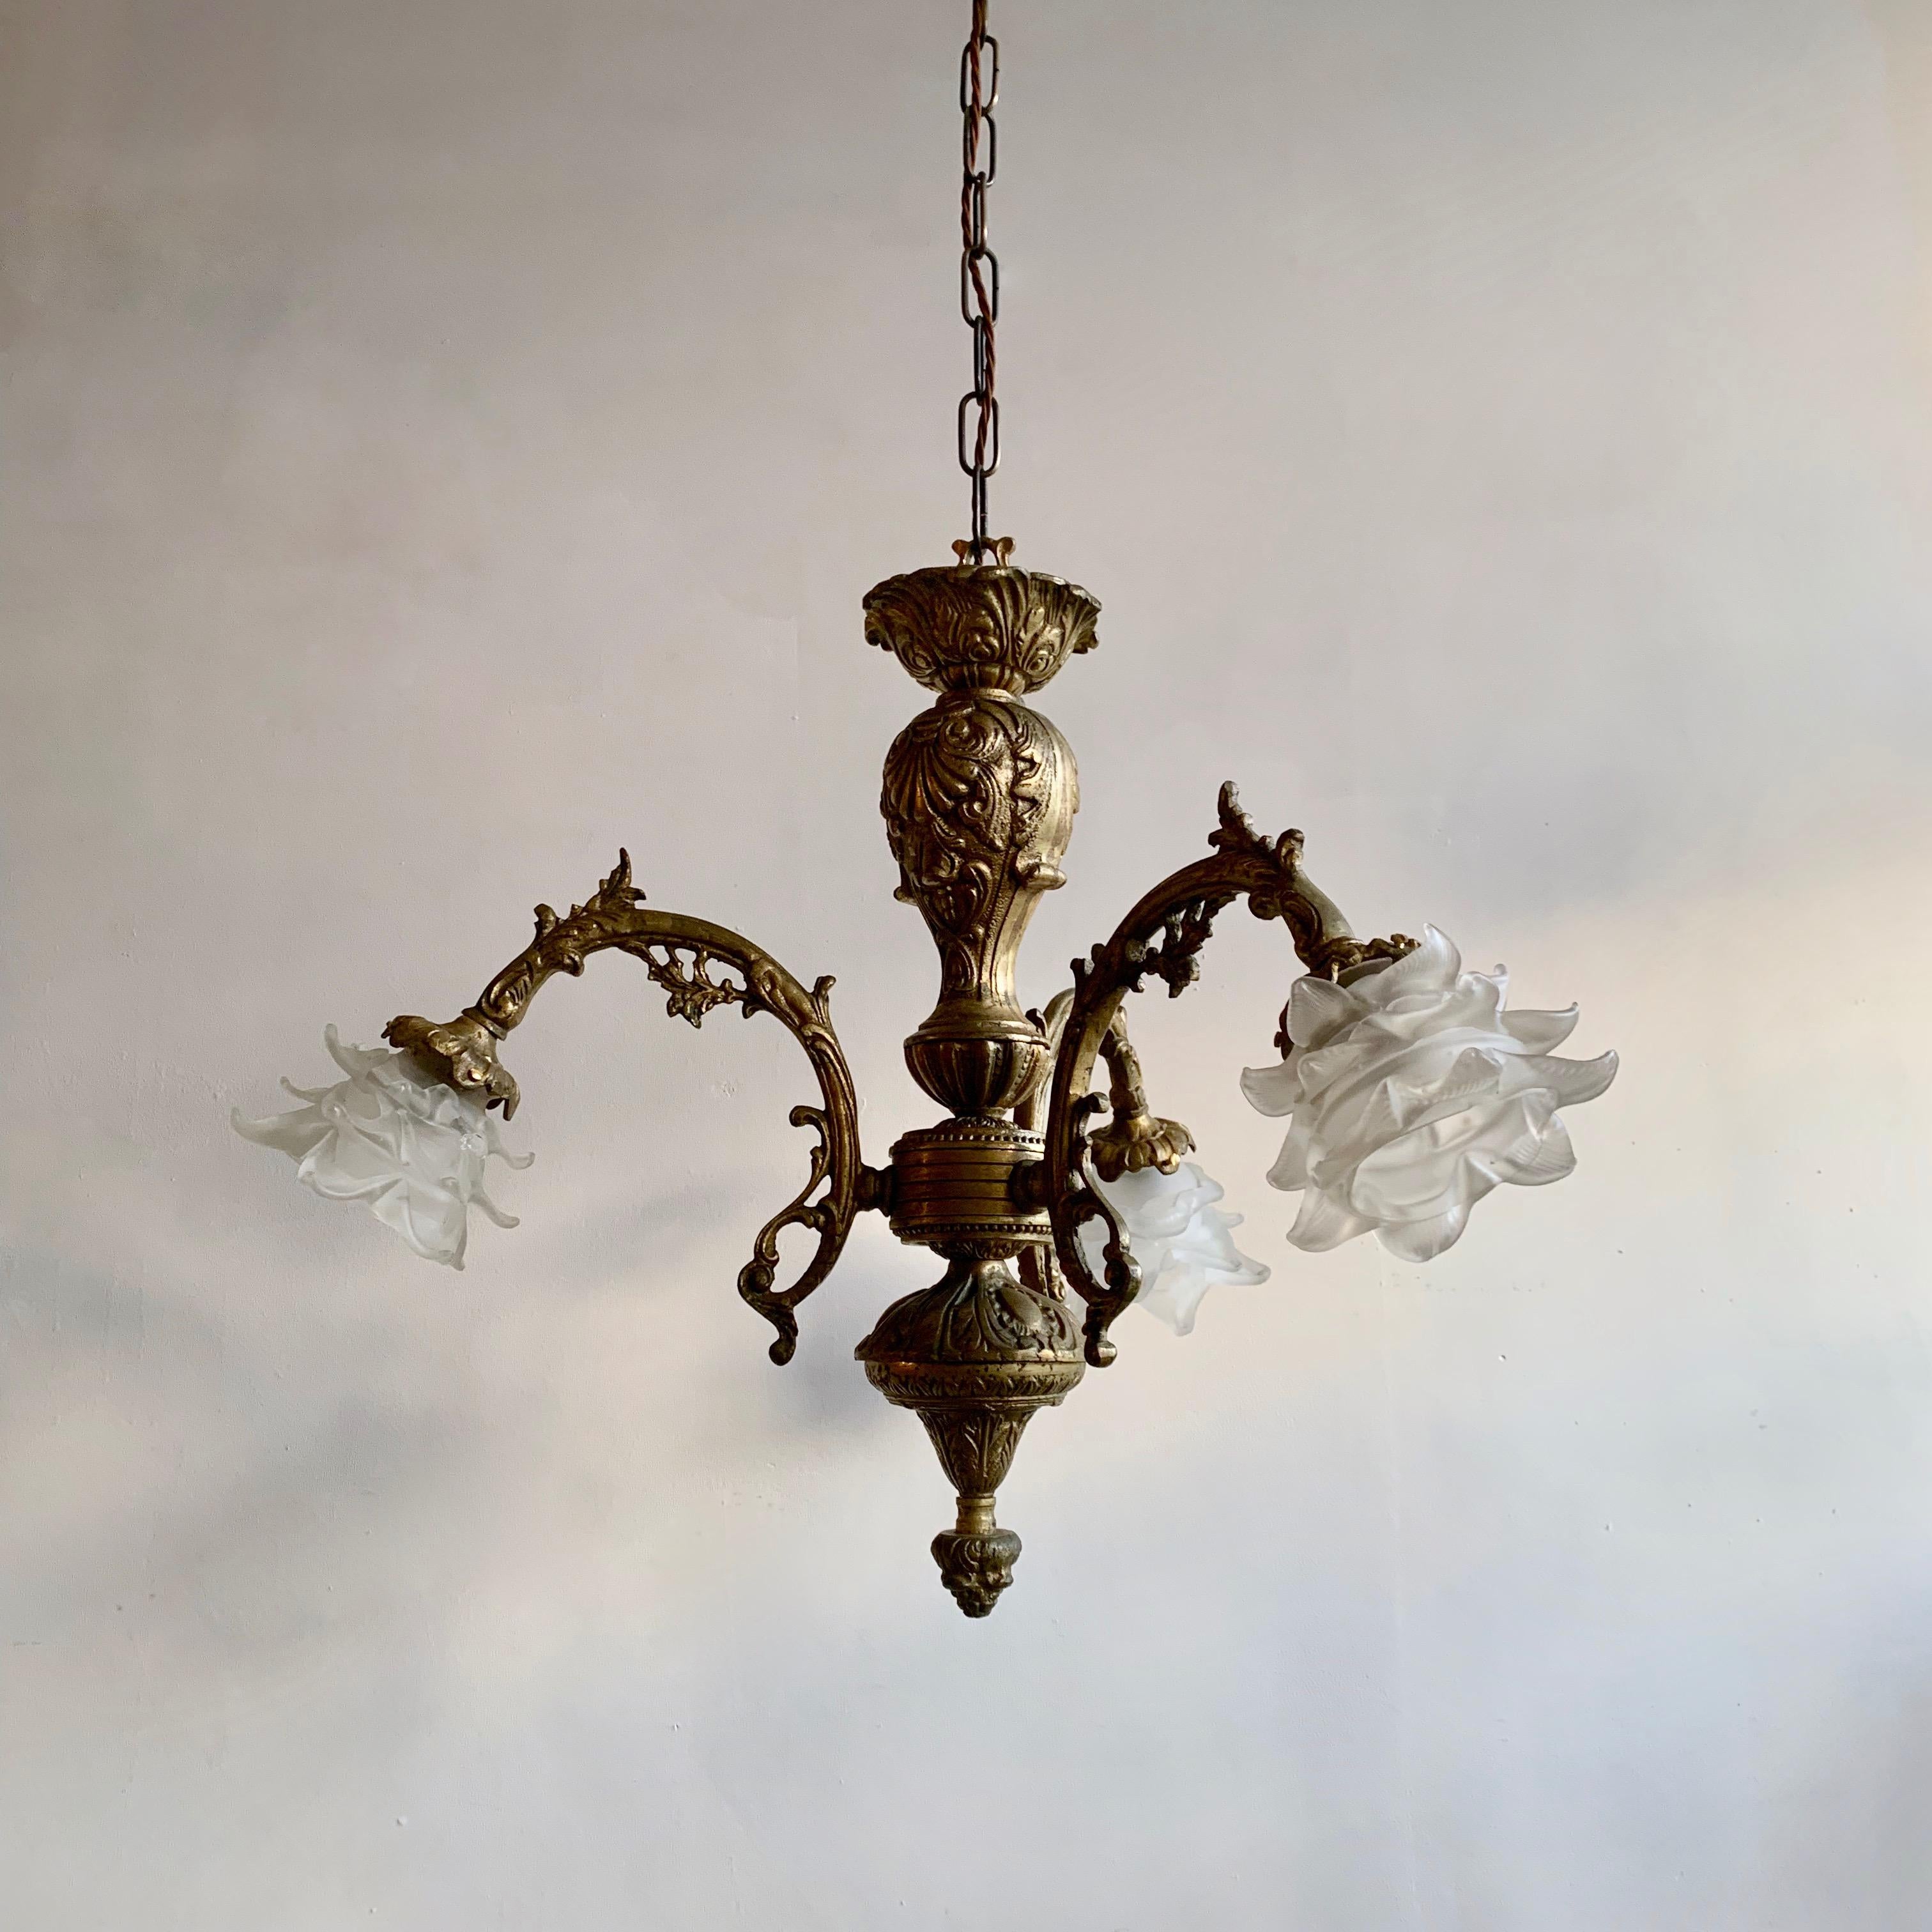 Mid-20th Century  Ornate Downlighter With Floral Shades For Sale